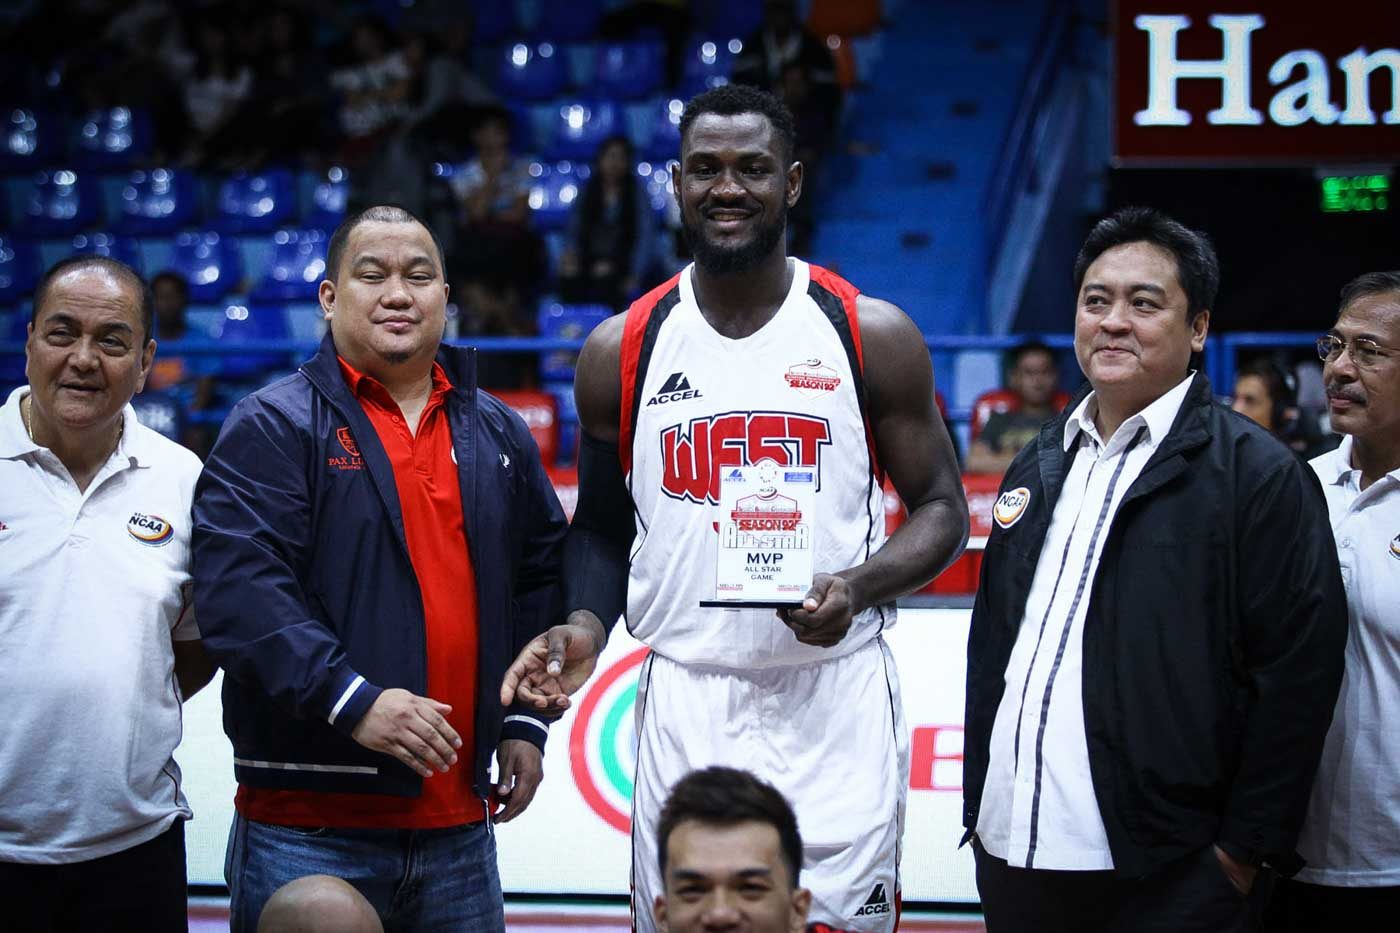 West dominates East in NCAA All-Star Game; Haruna wins dunk crown